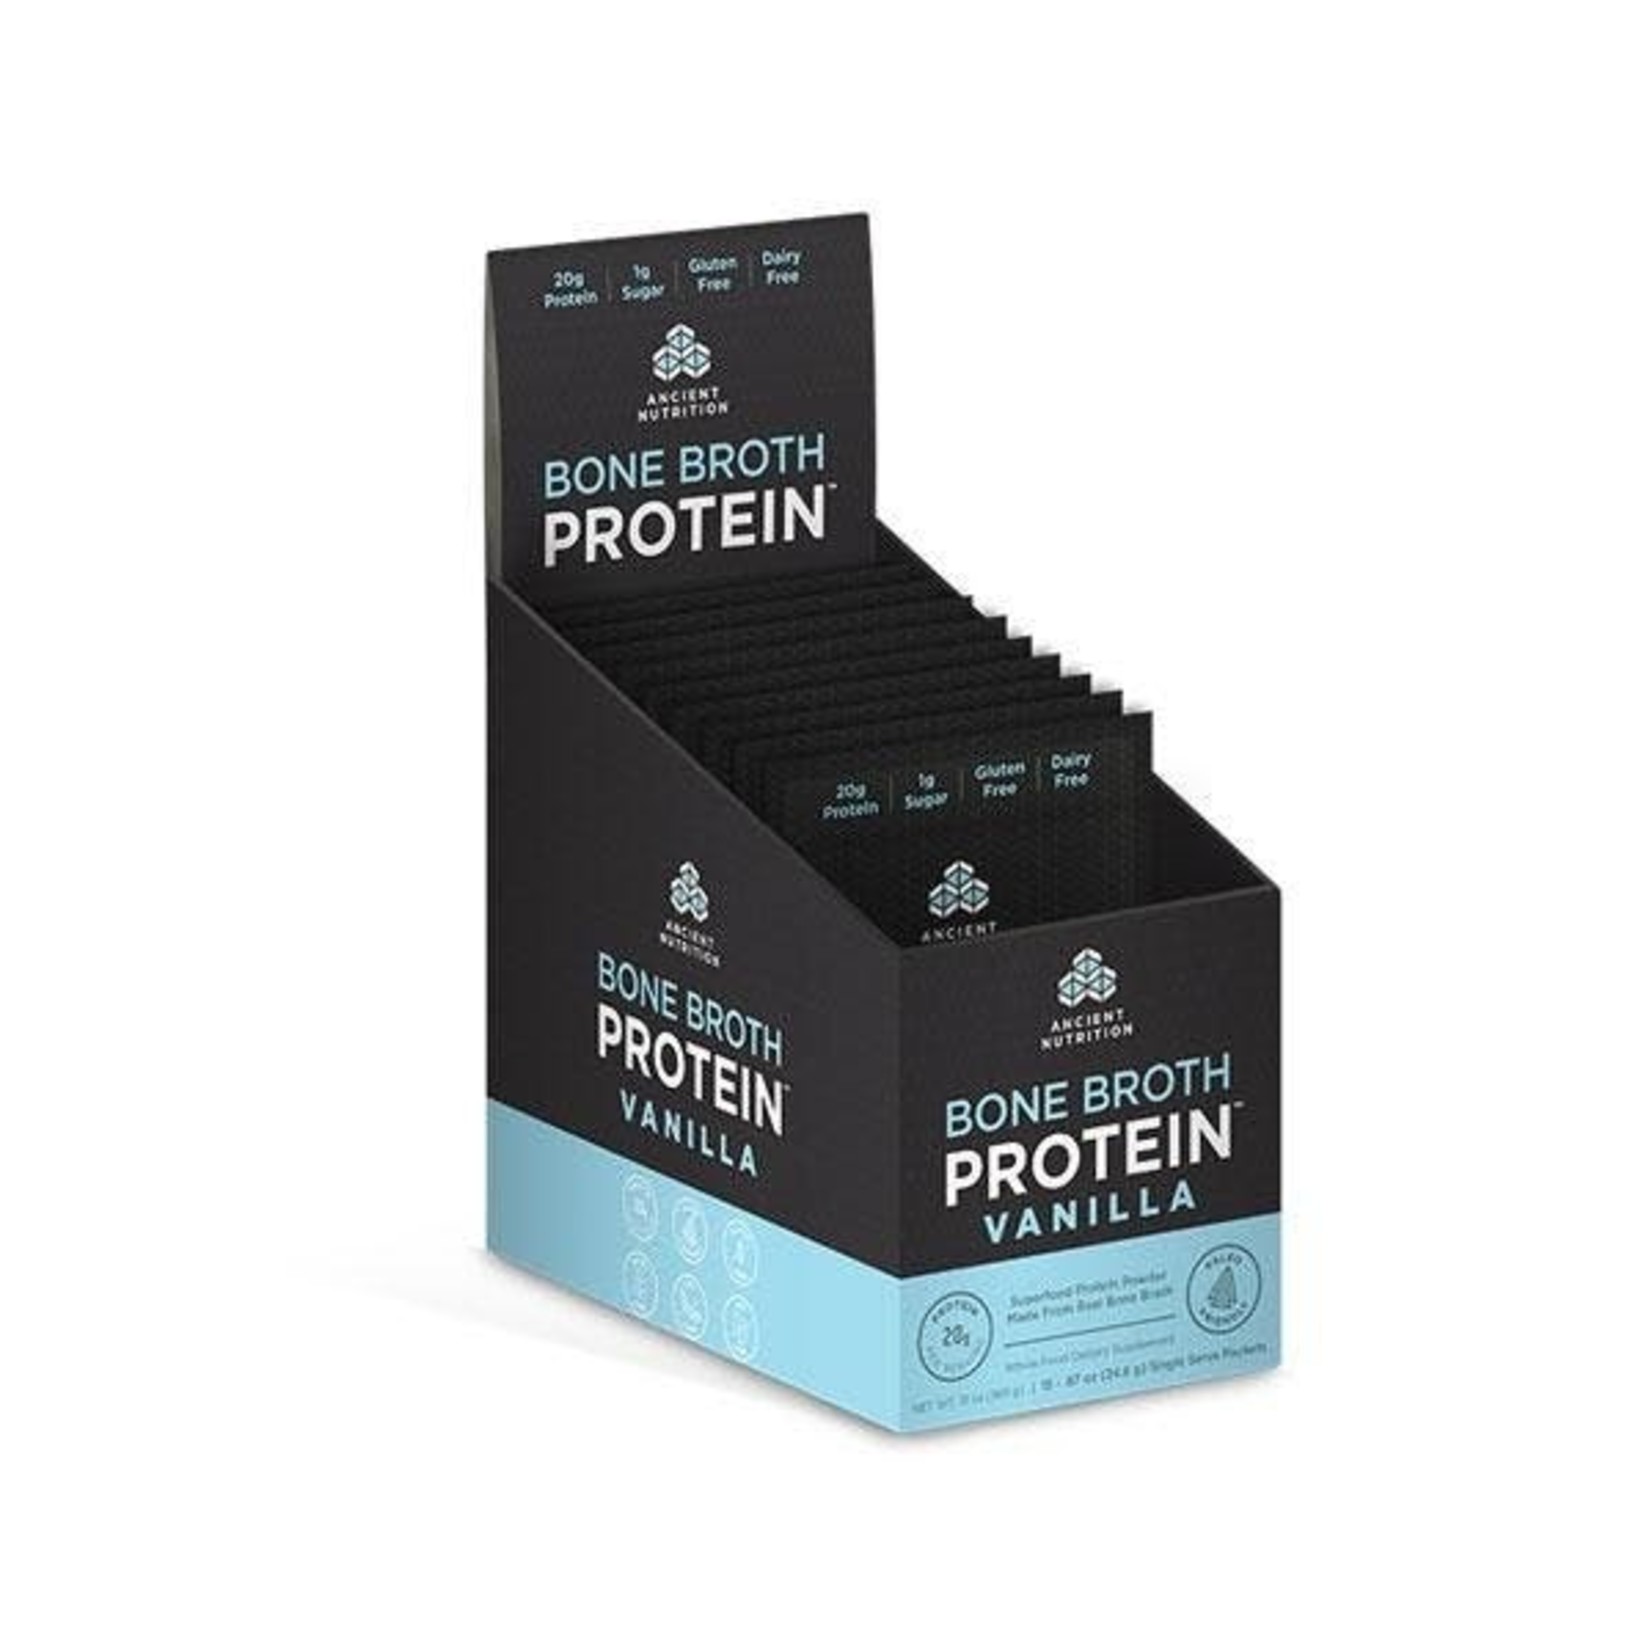 Ancient Nutrition Ancient Nutrition - Box of Bone Broth Protein Vanilla - 15 Packs